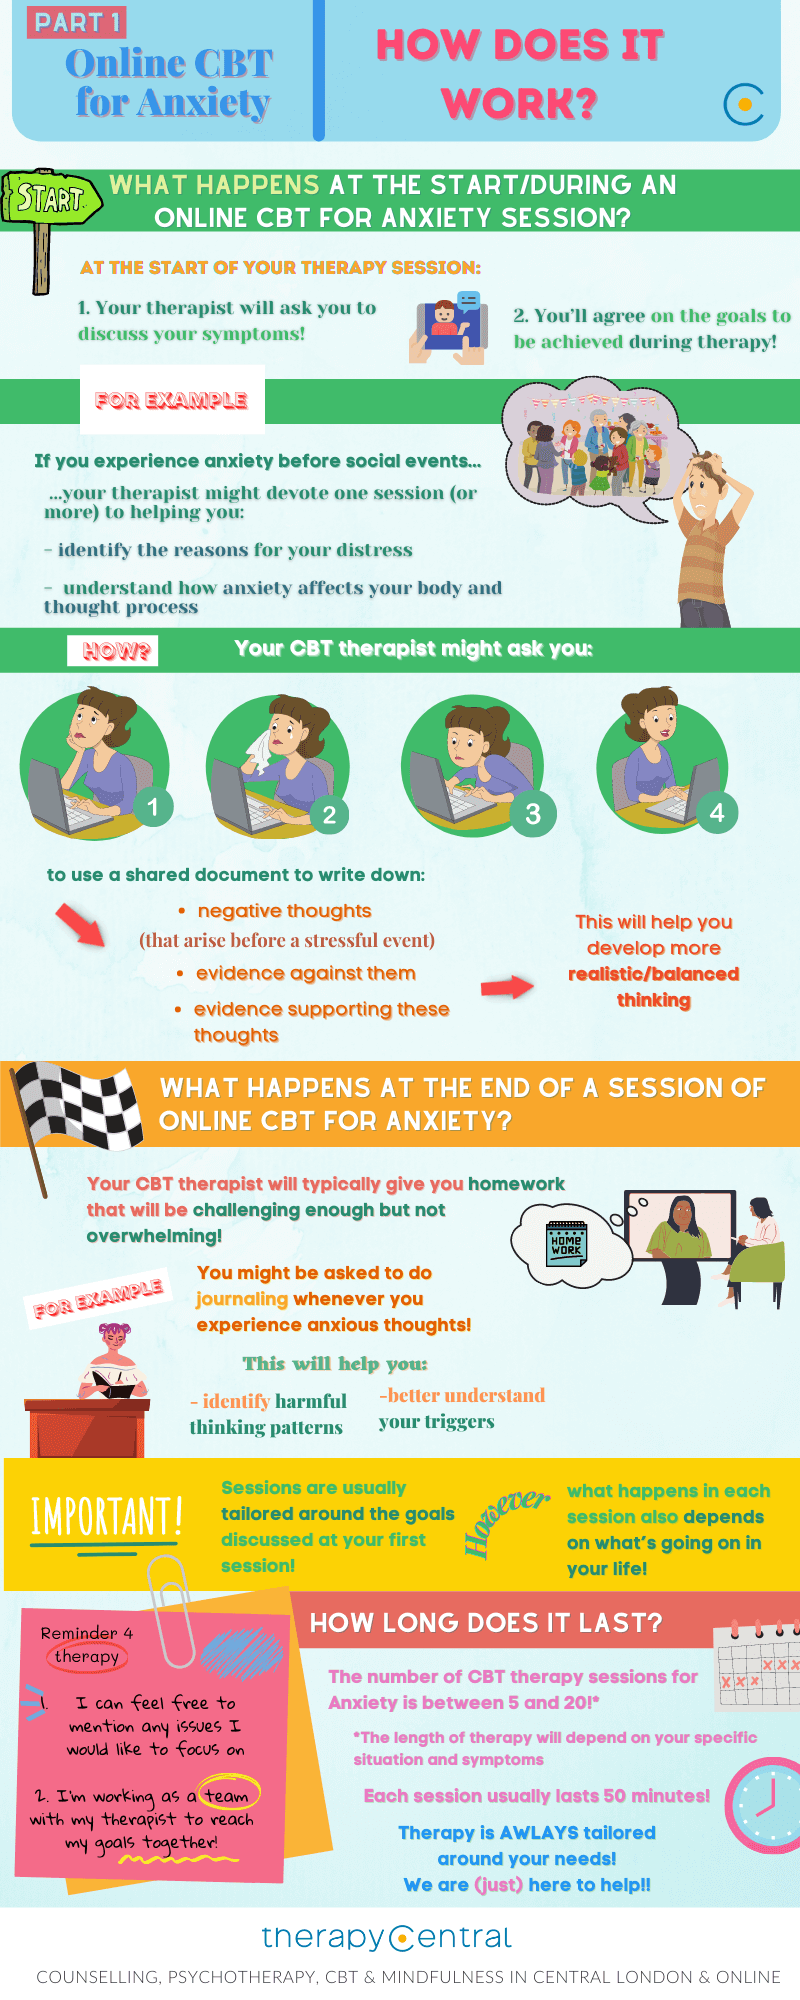 Infographic - Online CBT for Anxiety: How does it Work?